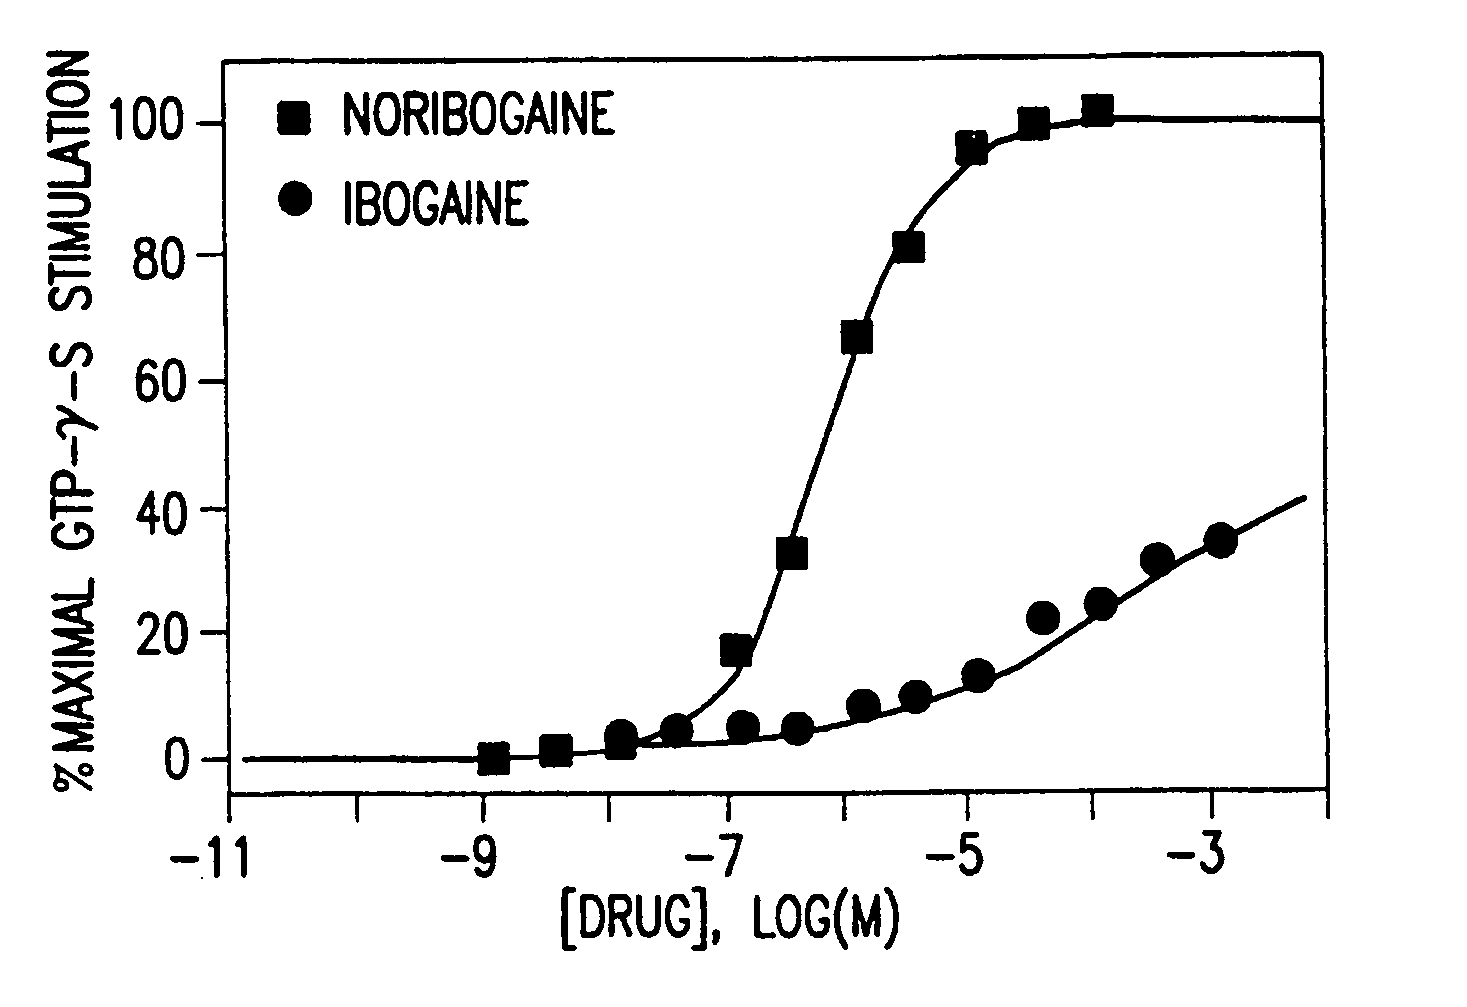 Noribogaine in the treatment of pain and drug addiction